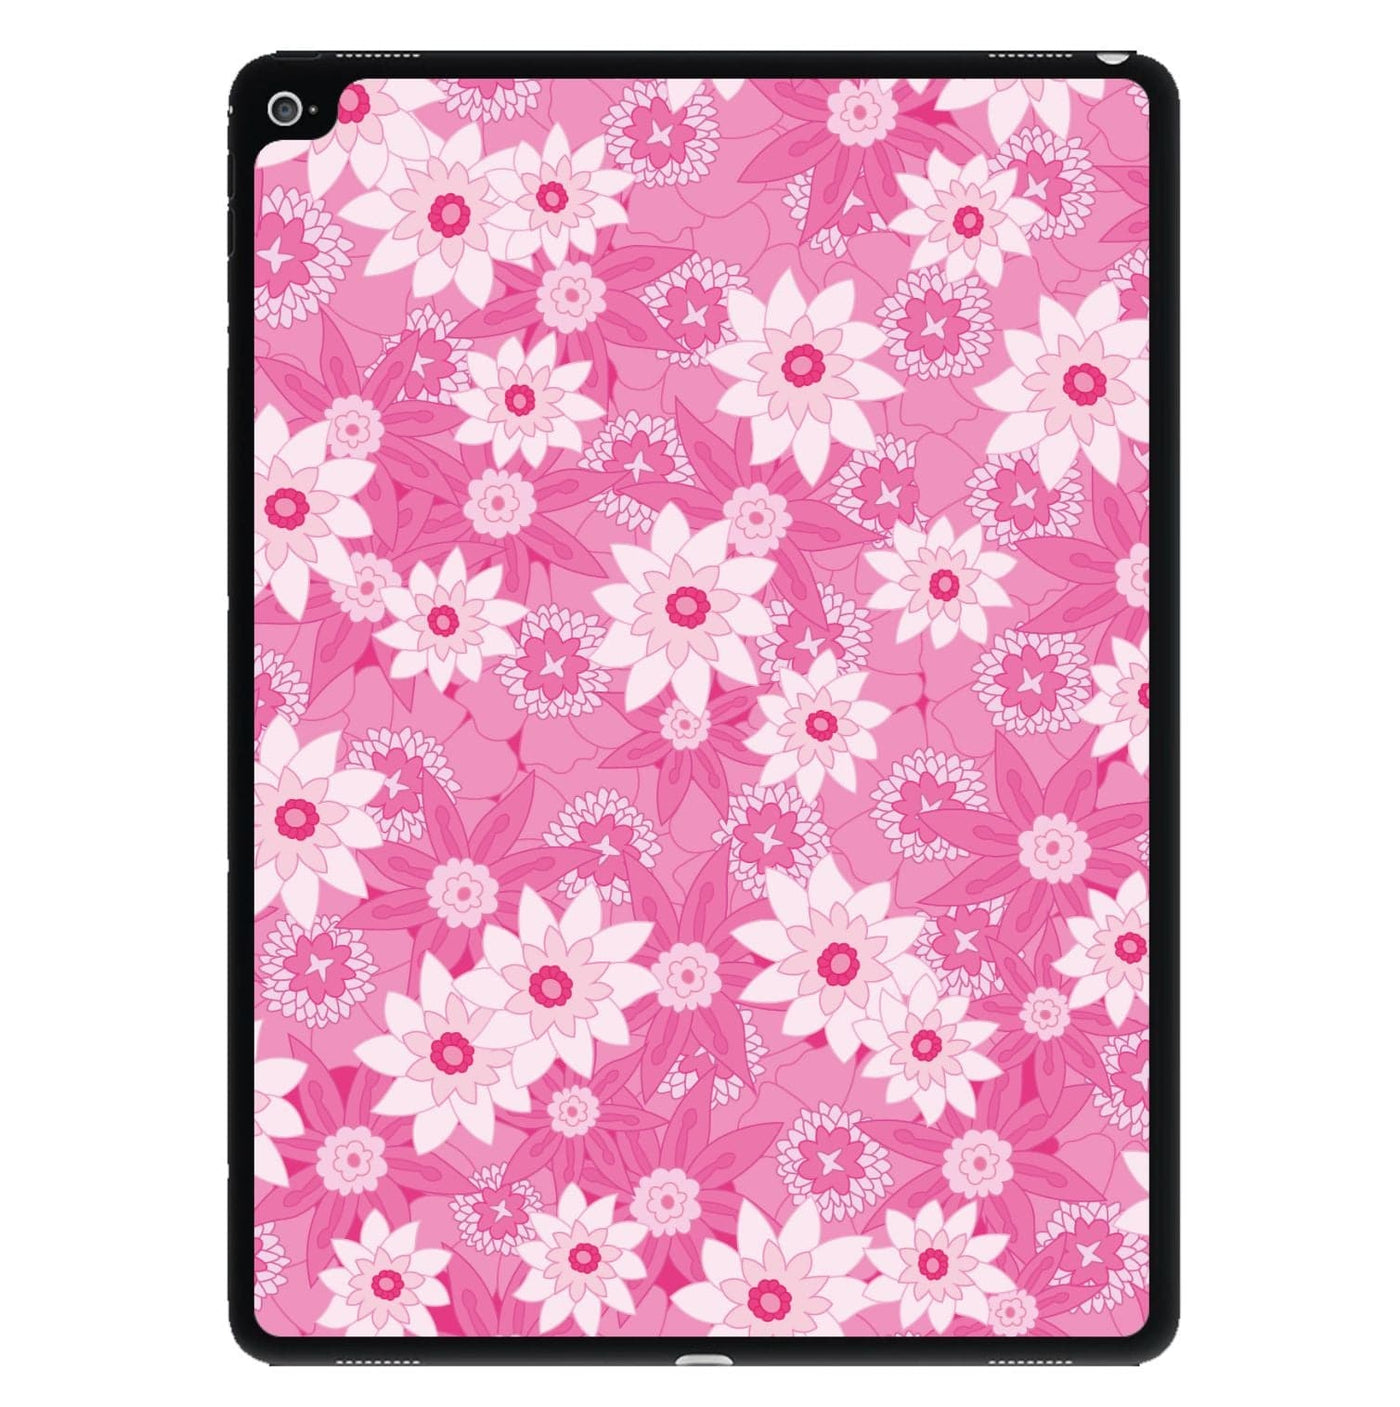 Pink Flowers - Floral Patterns iPad Case